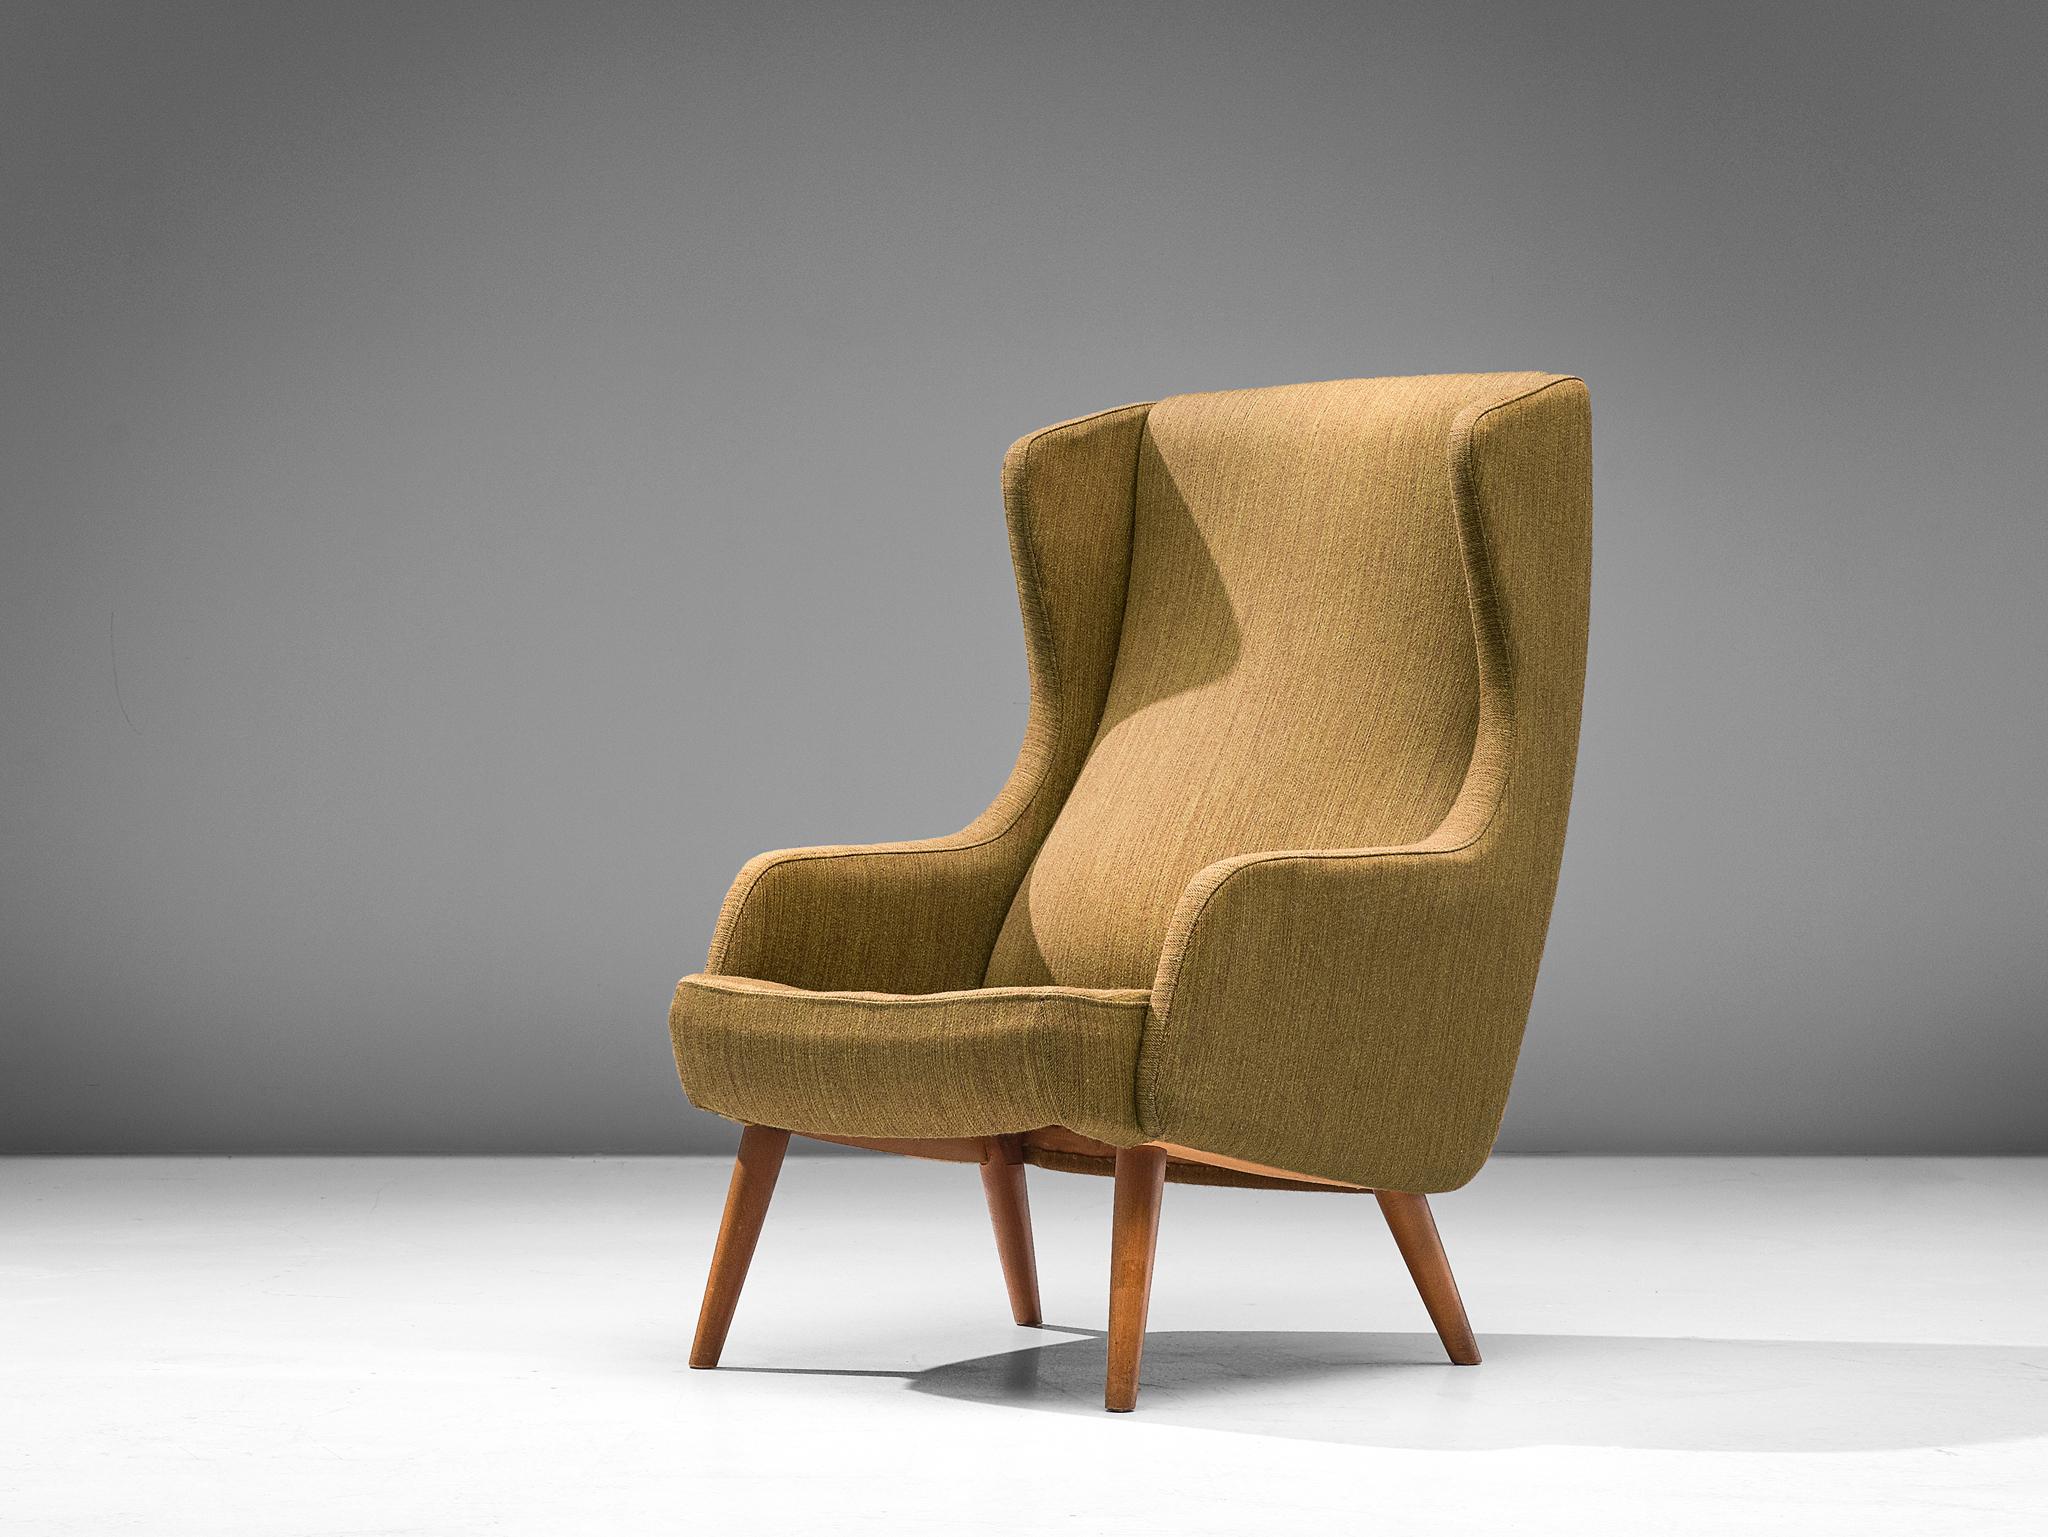 Fritz Hansen, wingback chair, in oak and fabric, Scandinavia 1950s.

High back chair in a mustard fabric upholstery. This chair shows the characteristics of the Scandinavian Modern style and is manufactured by the master cabinetmaker Fritz Hansen.